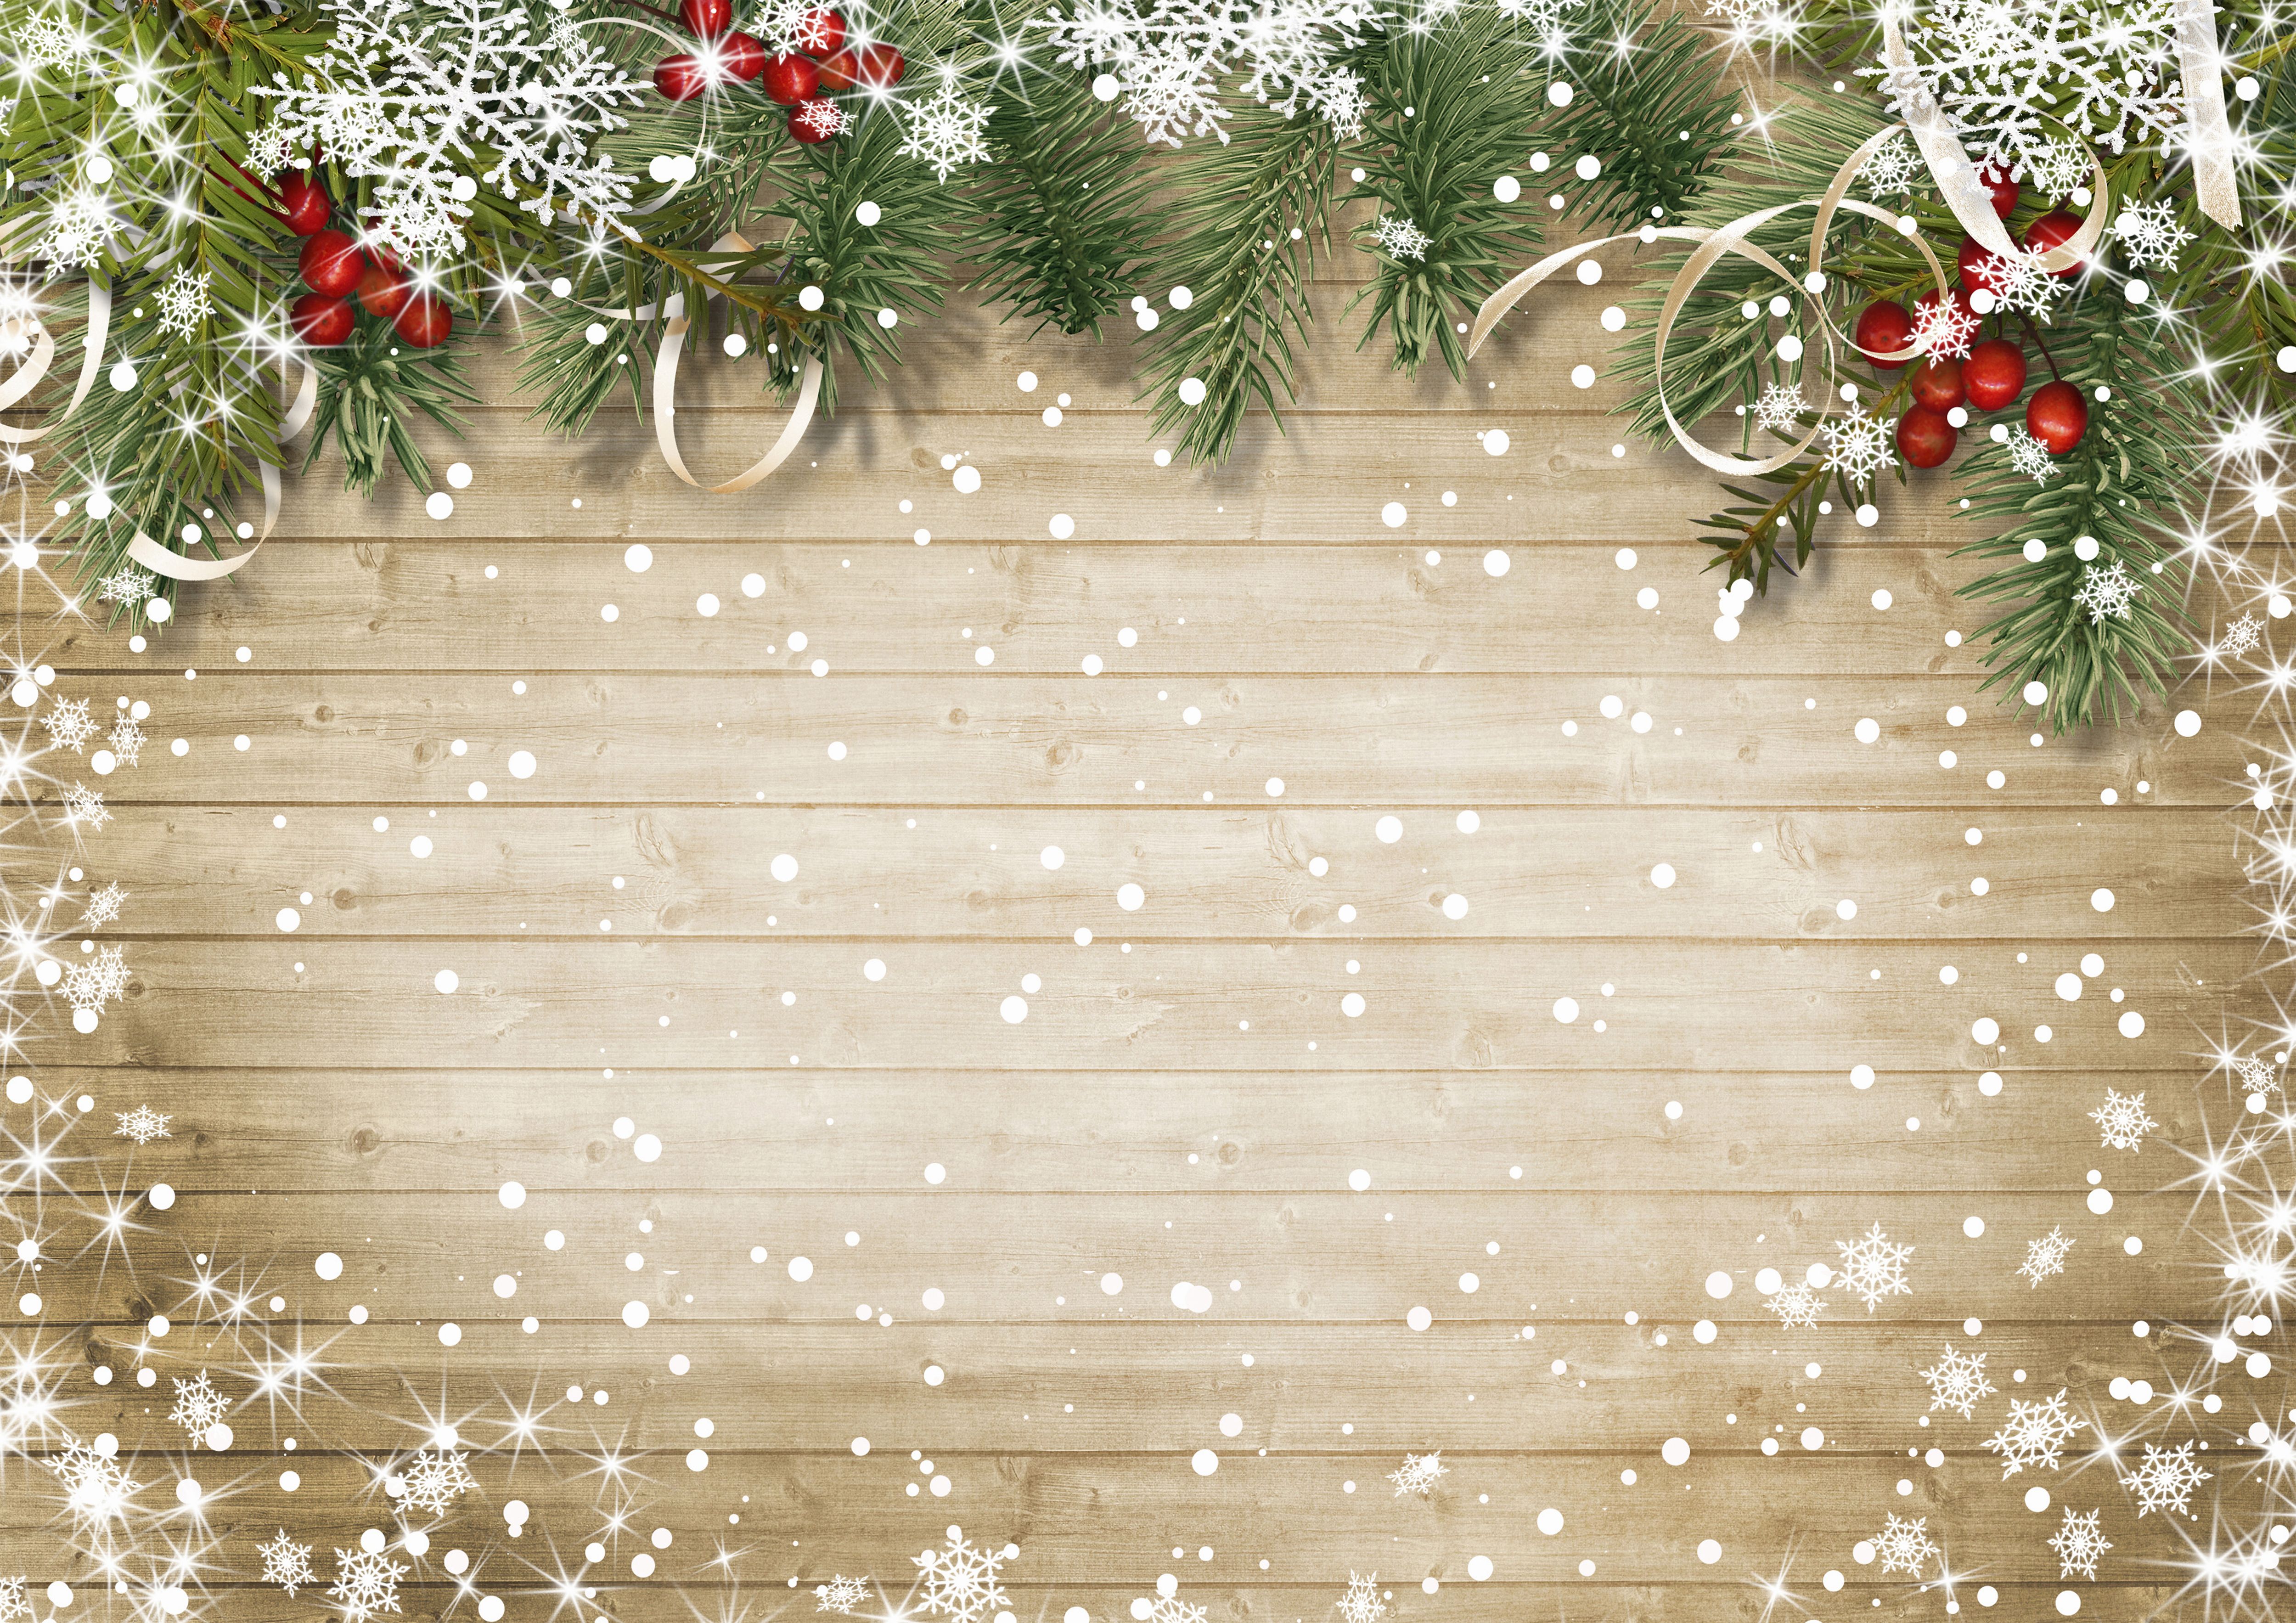 Christmas Deco Wooden Background Quality Image And Transparent PNG Free Clipart